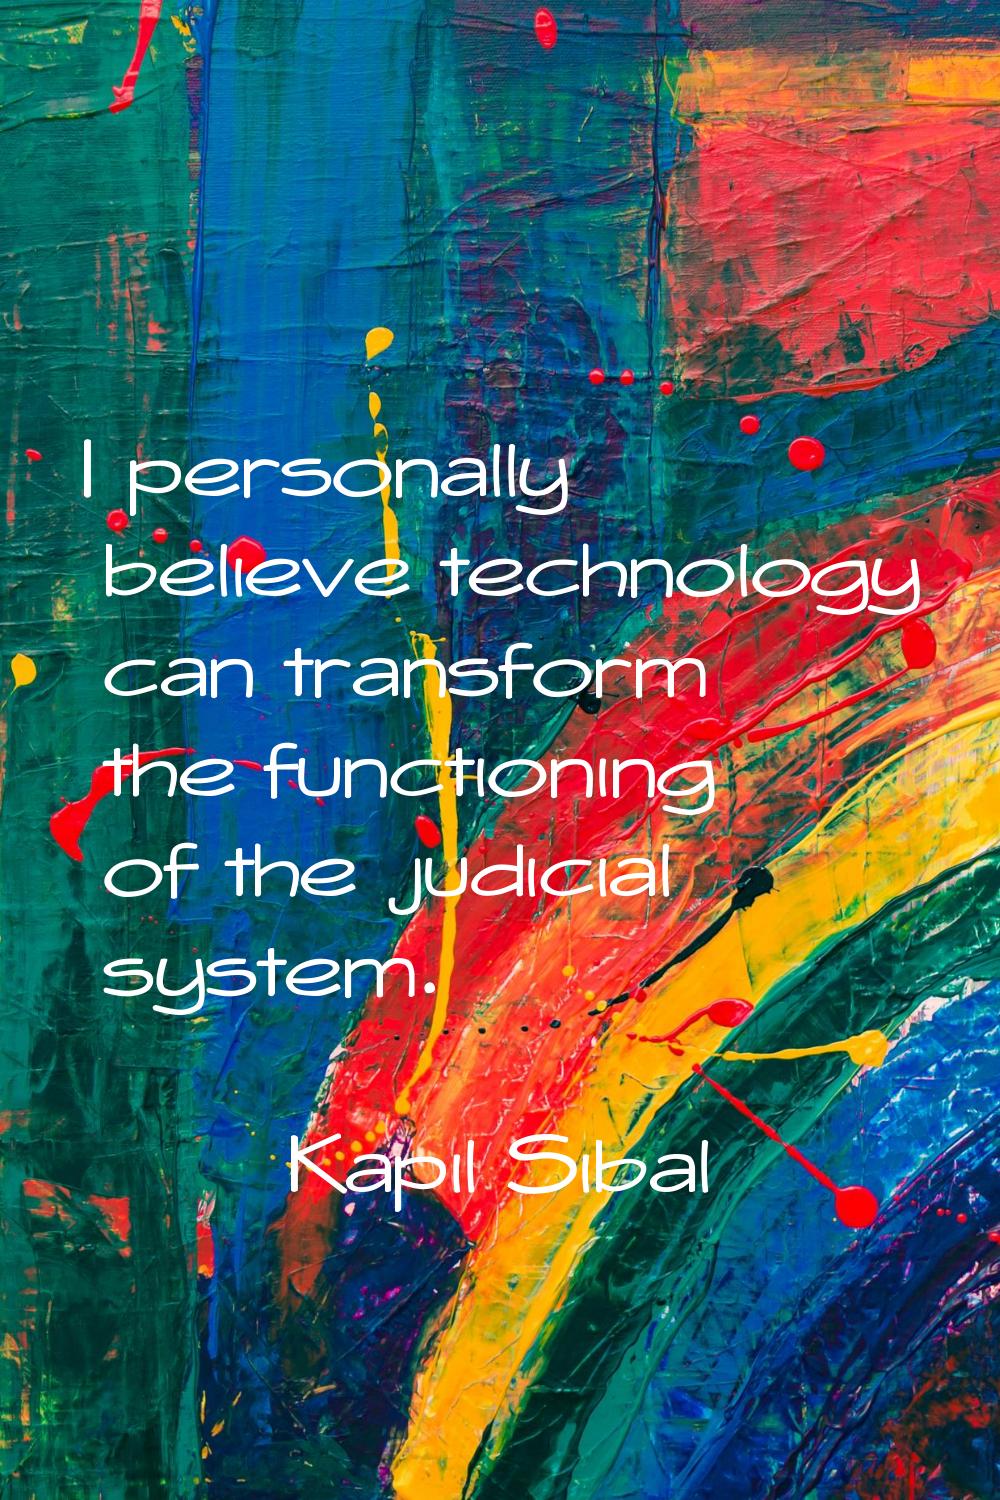 I personally believe technology can transform the functioning of the judicial system.